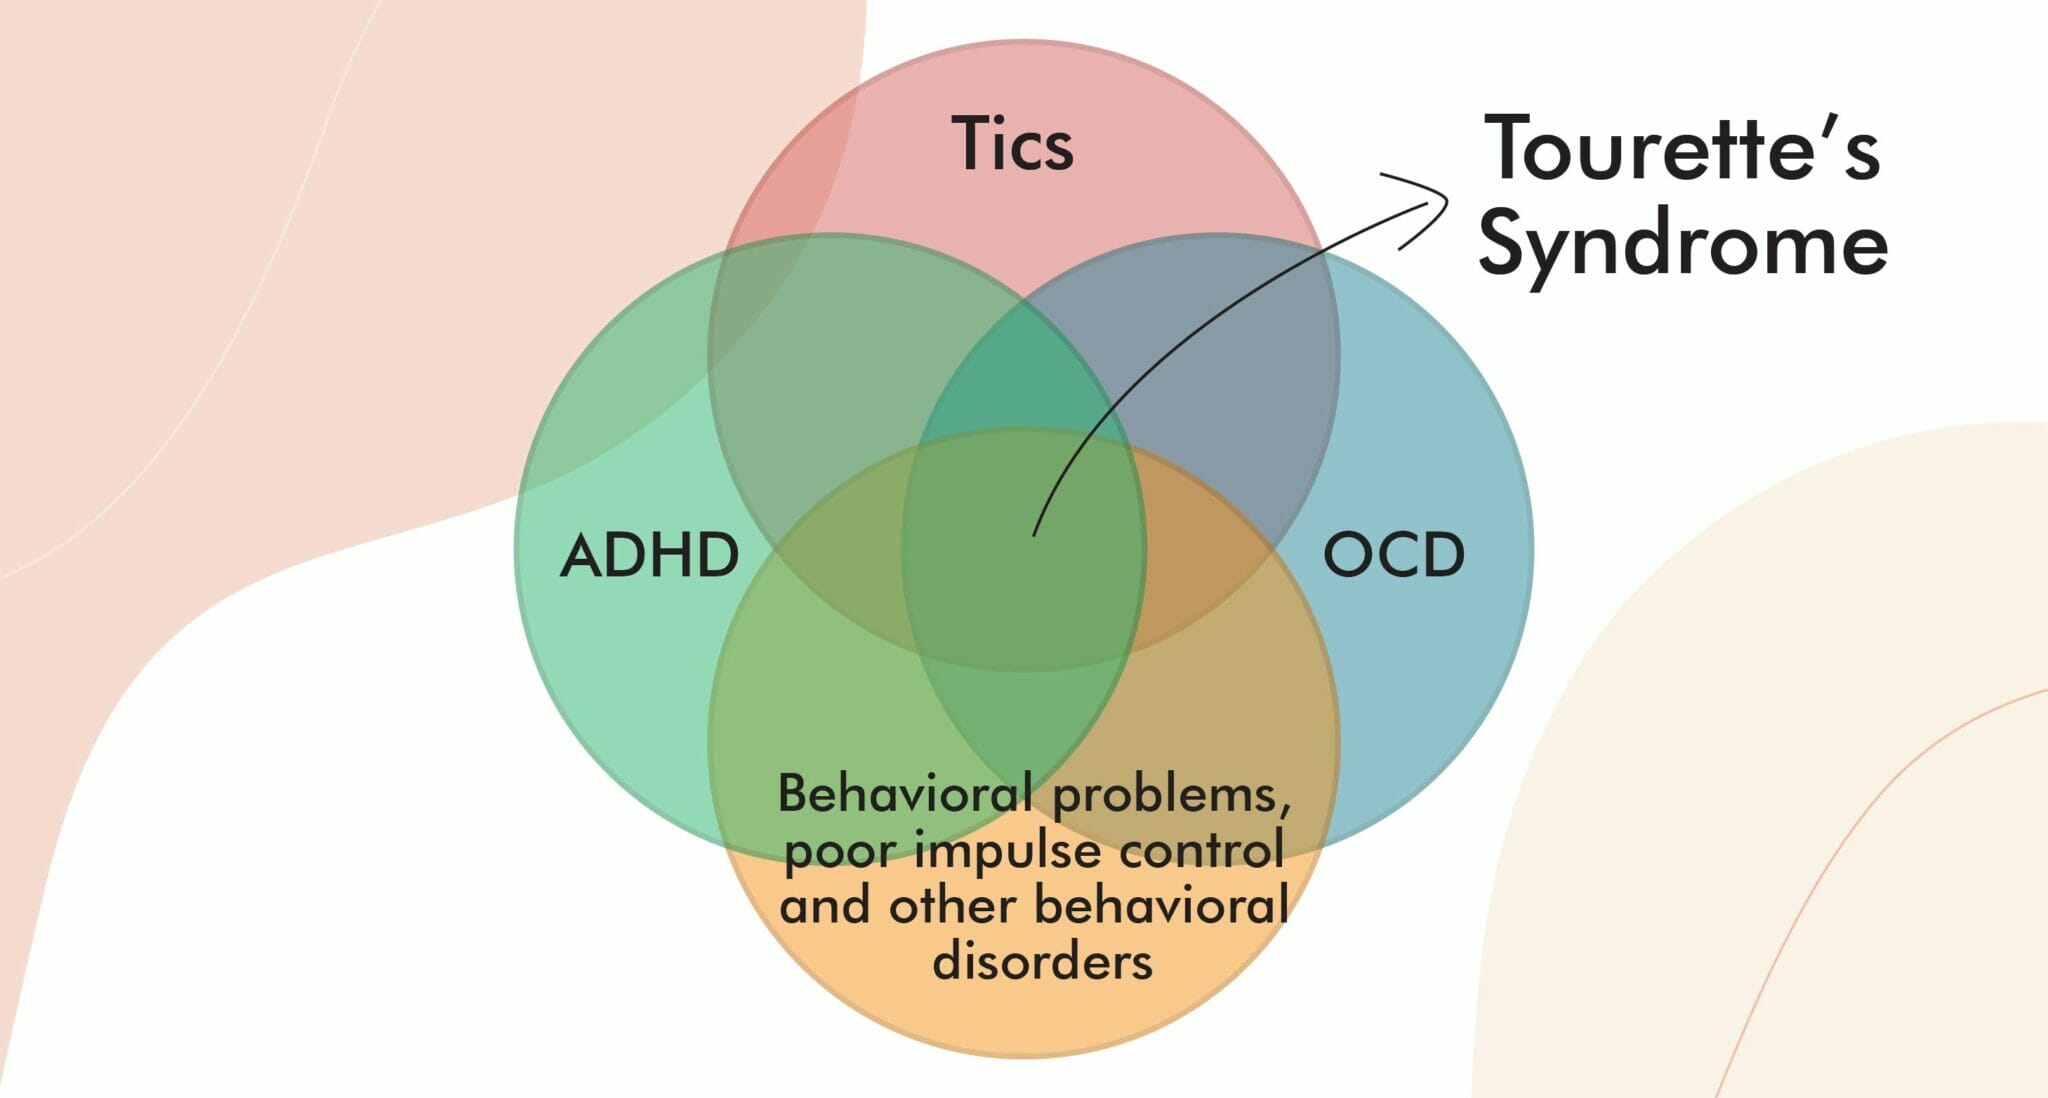 Diagram showing Tourette’s Syndrome, Tics, ADHD, OCD and other disorders